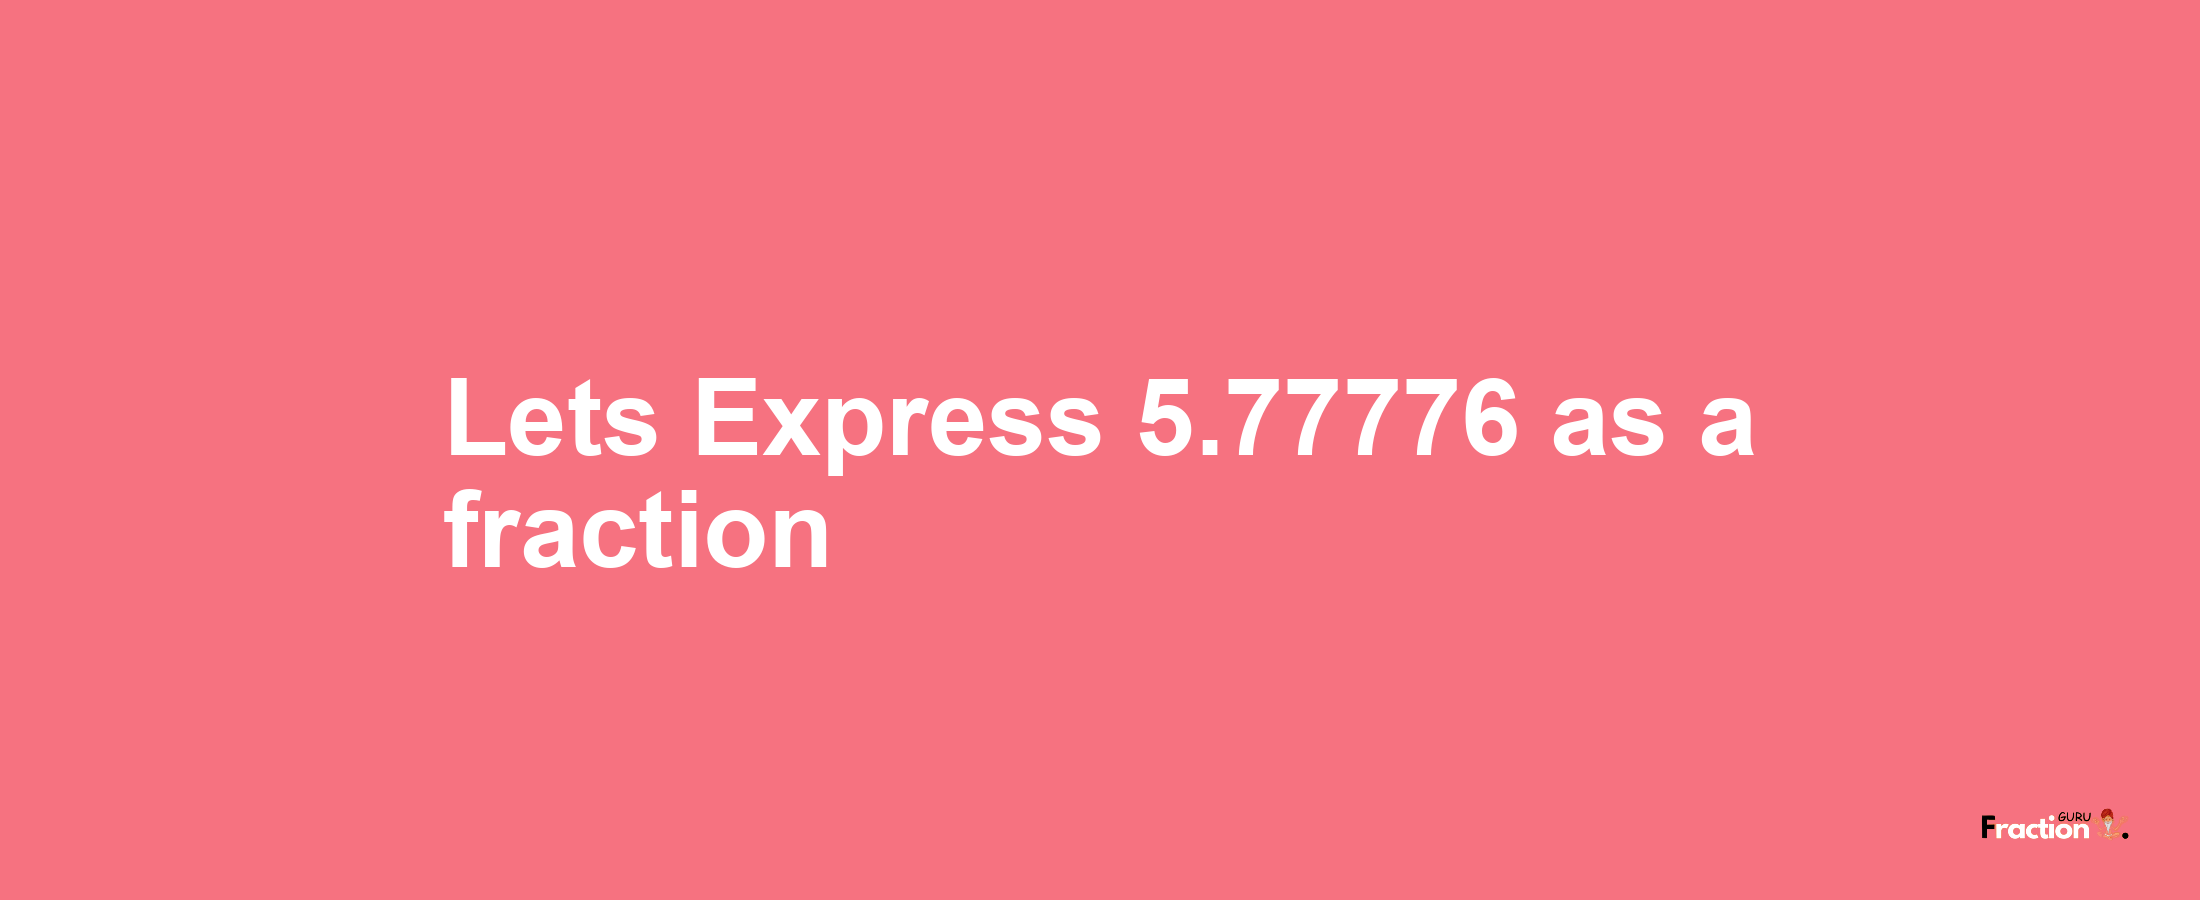 Lets Express 5.77776 as afraction